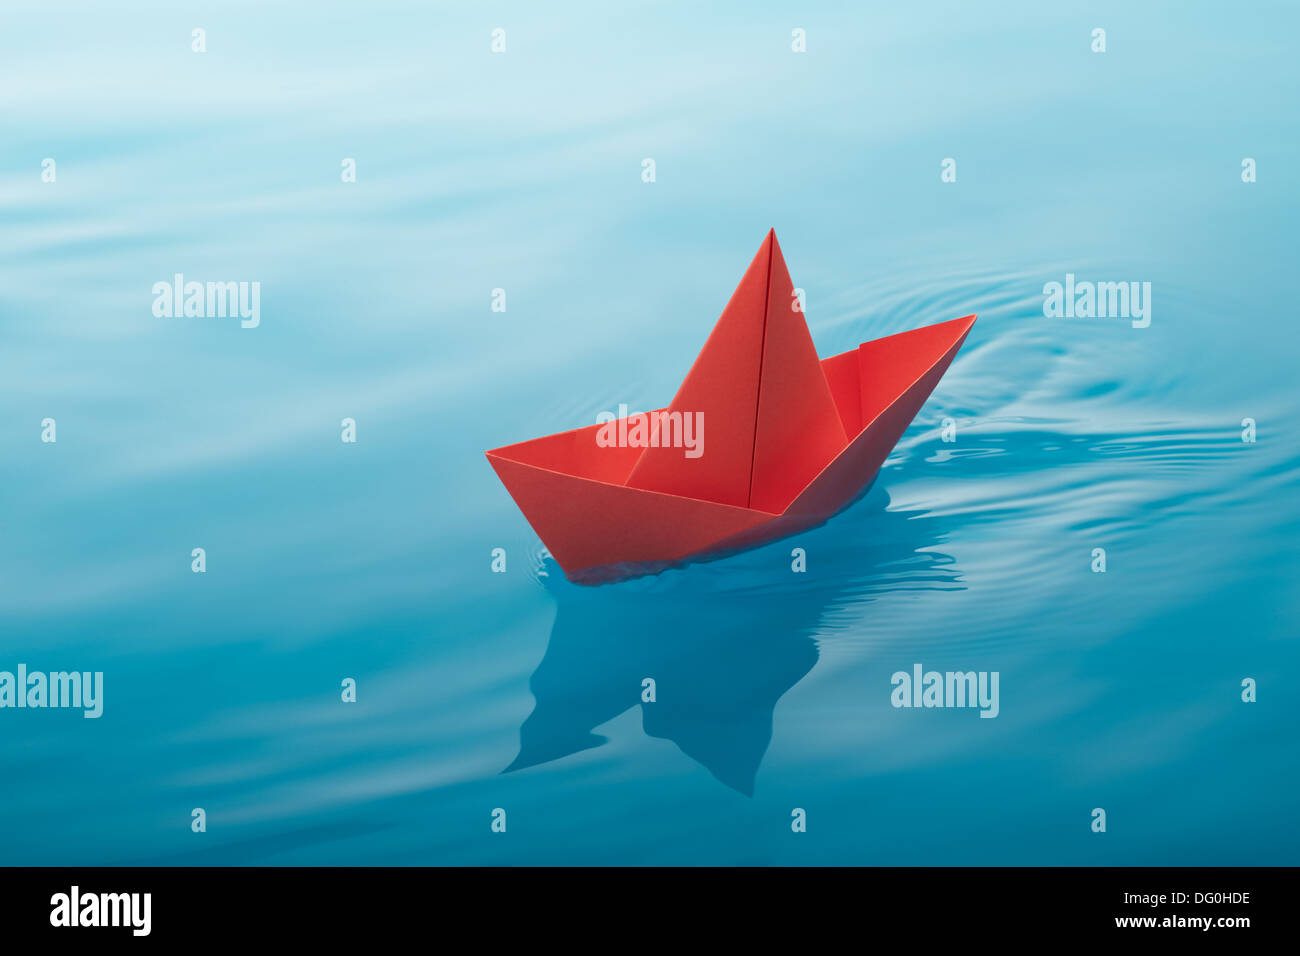 red paper boat sailing on water causing waves and ripples Stock Photo